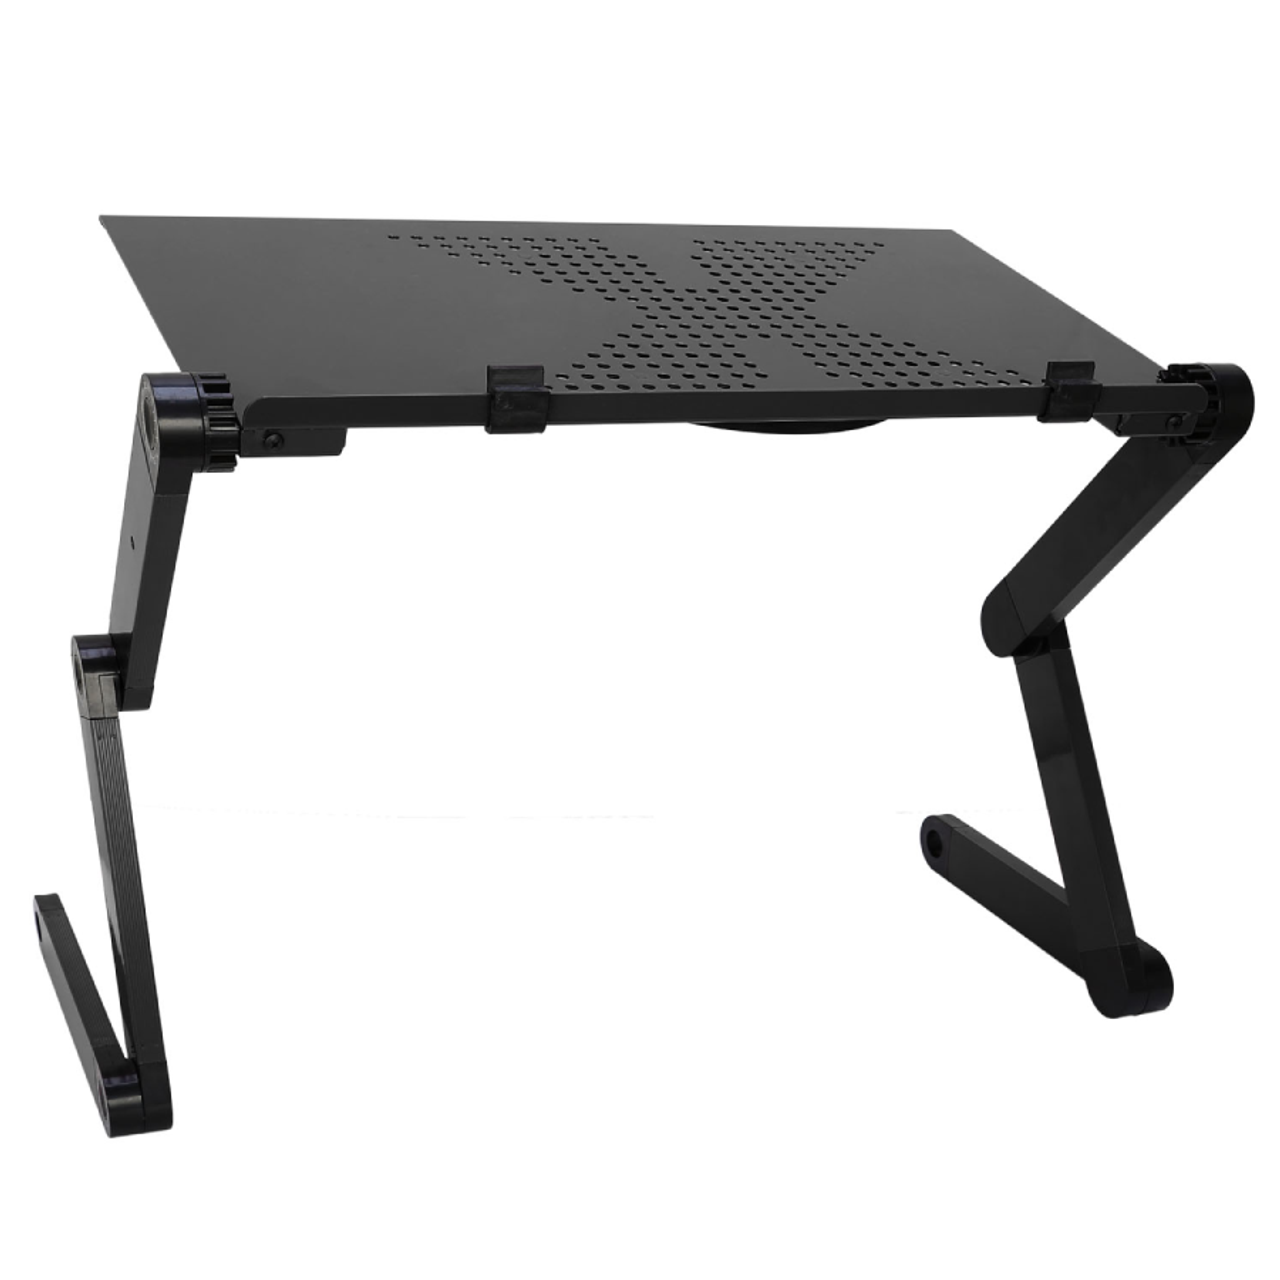 iMounTEK® Foldable Laptop Table Desk with Mouse Pad product image